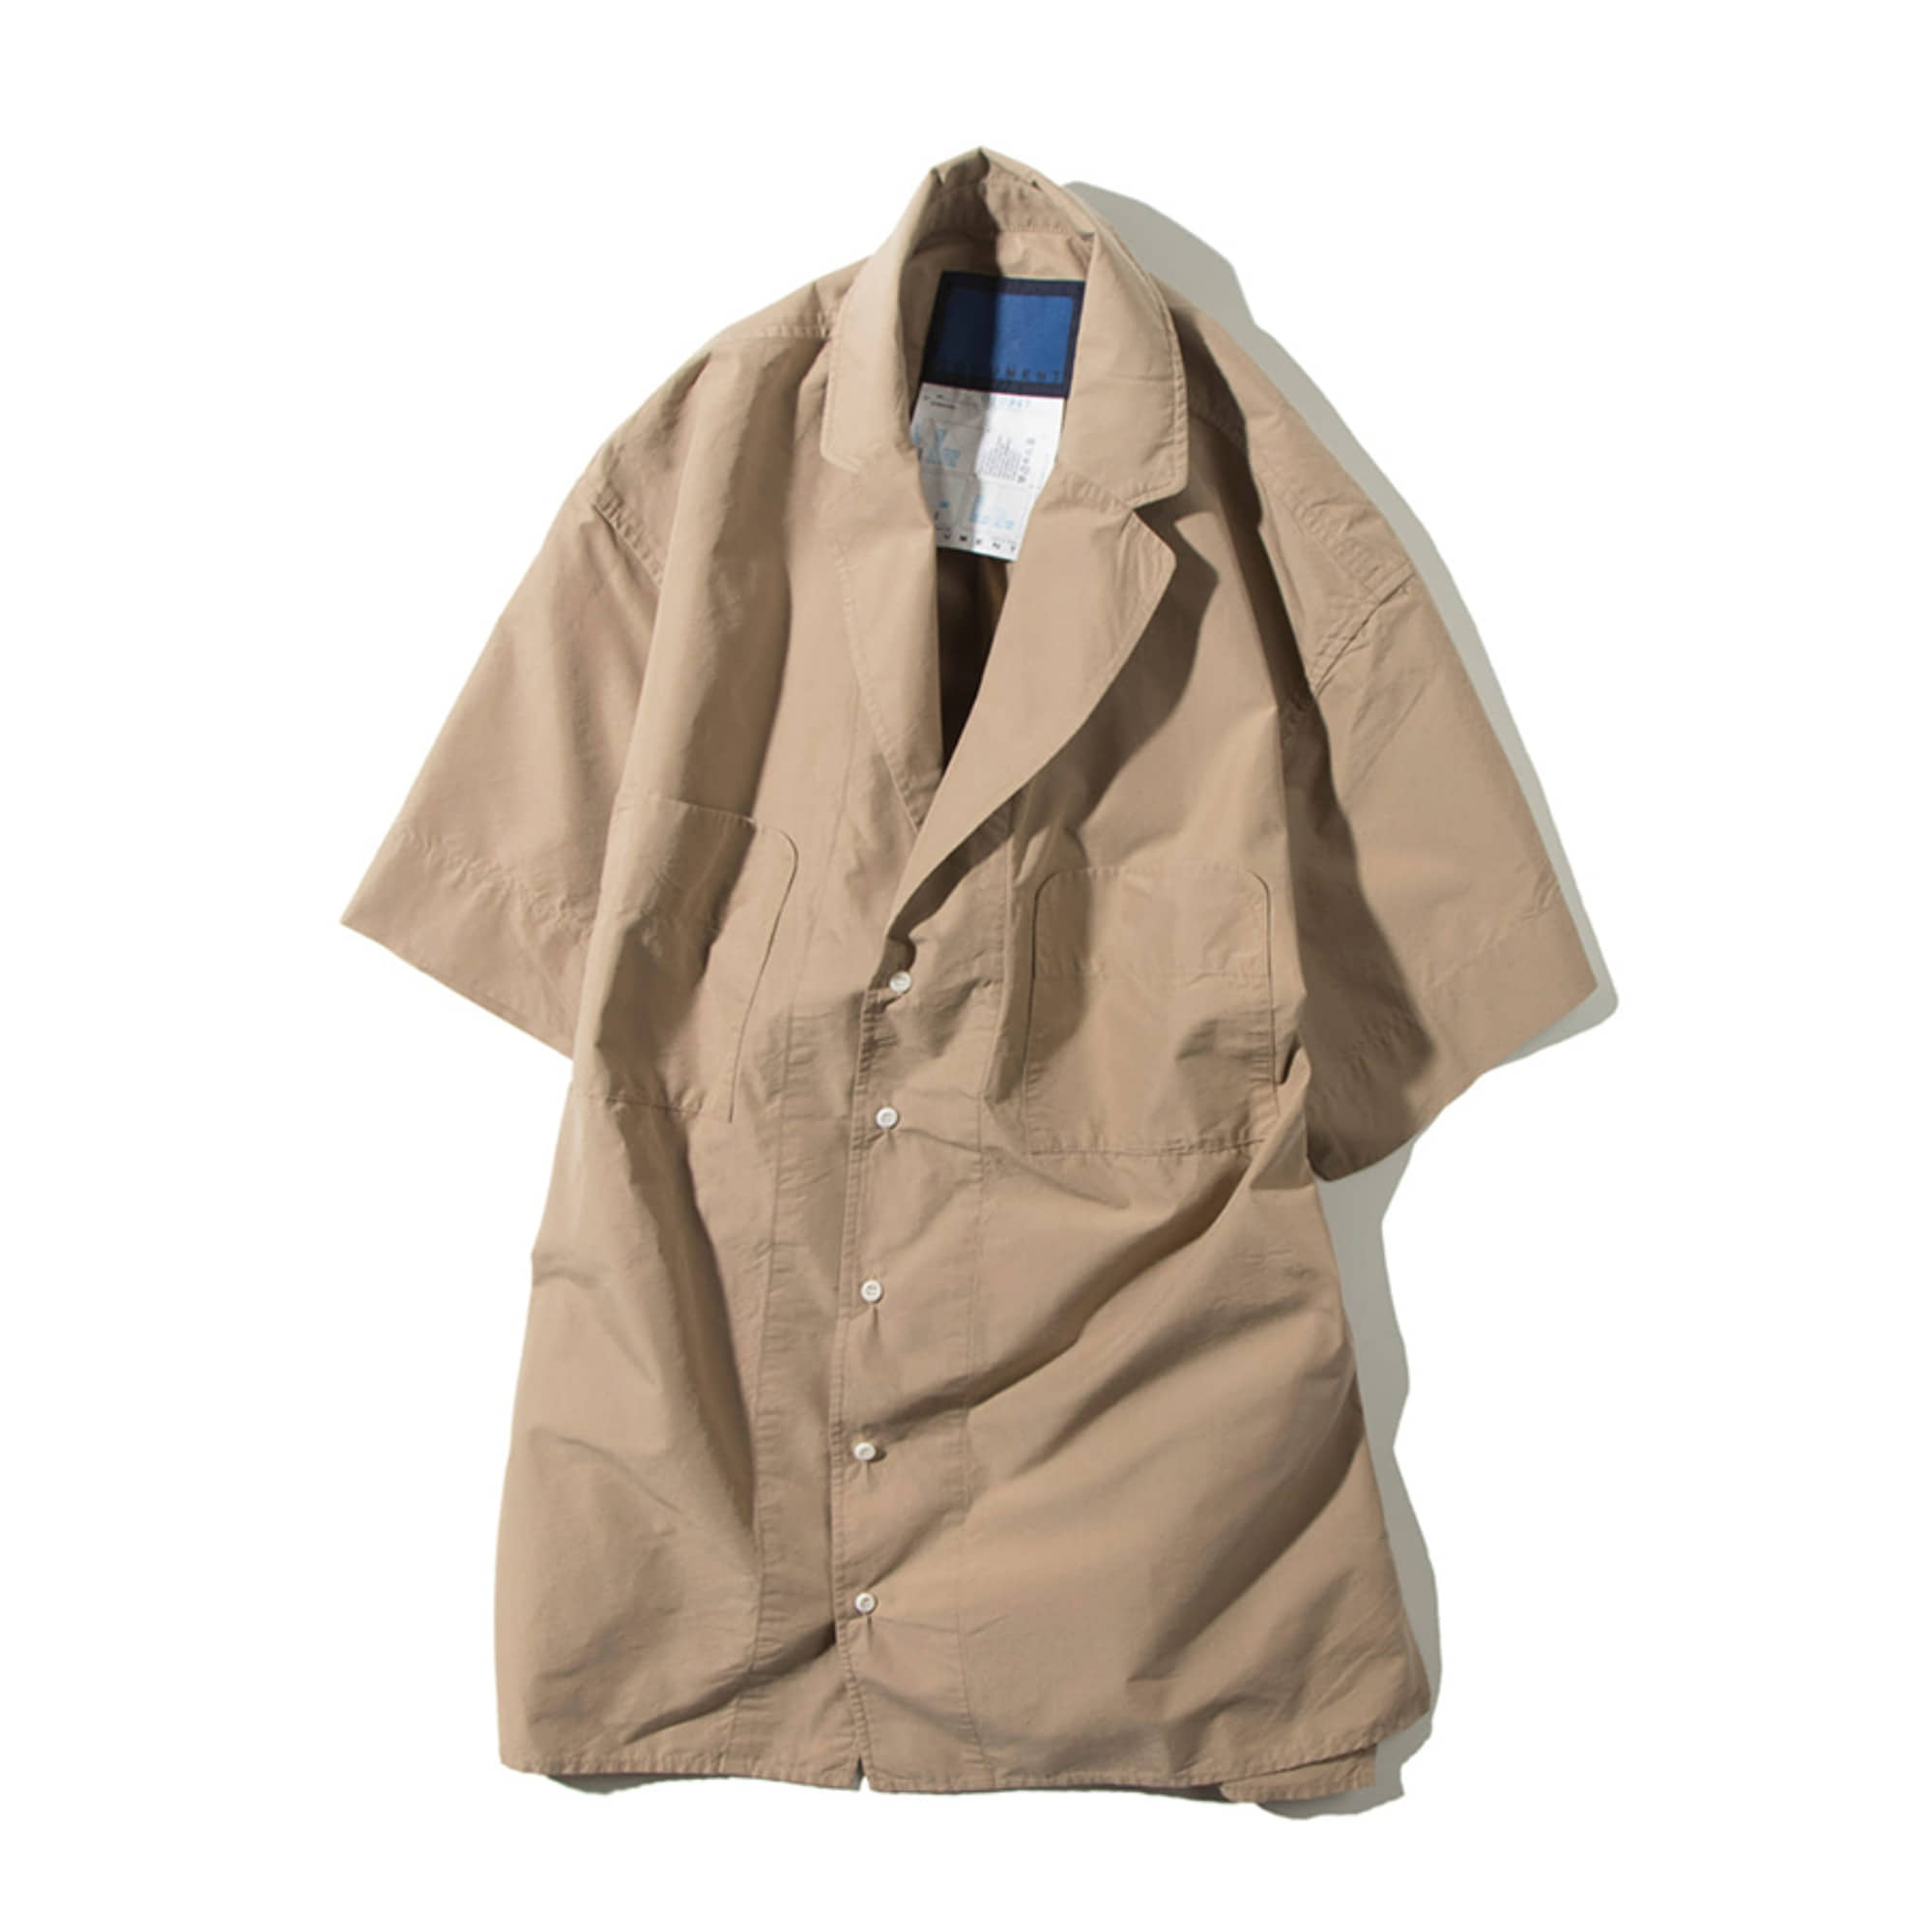 THE DOCUMENT MILITARY SHIRT (BEIGE)